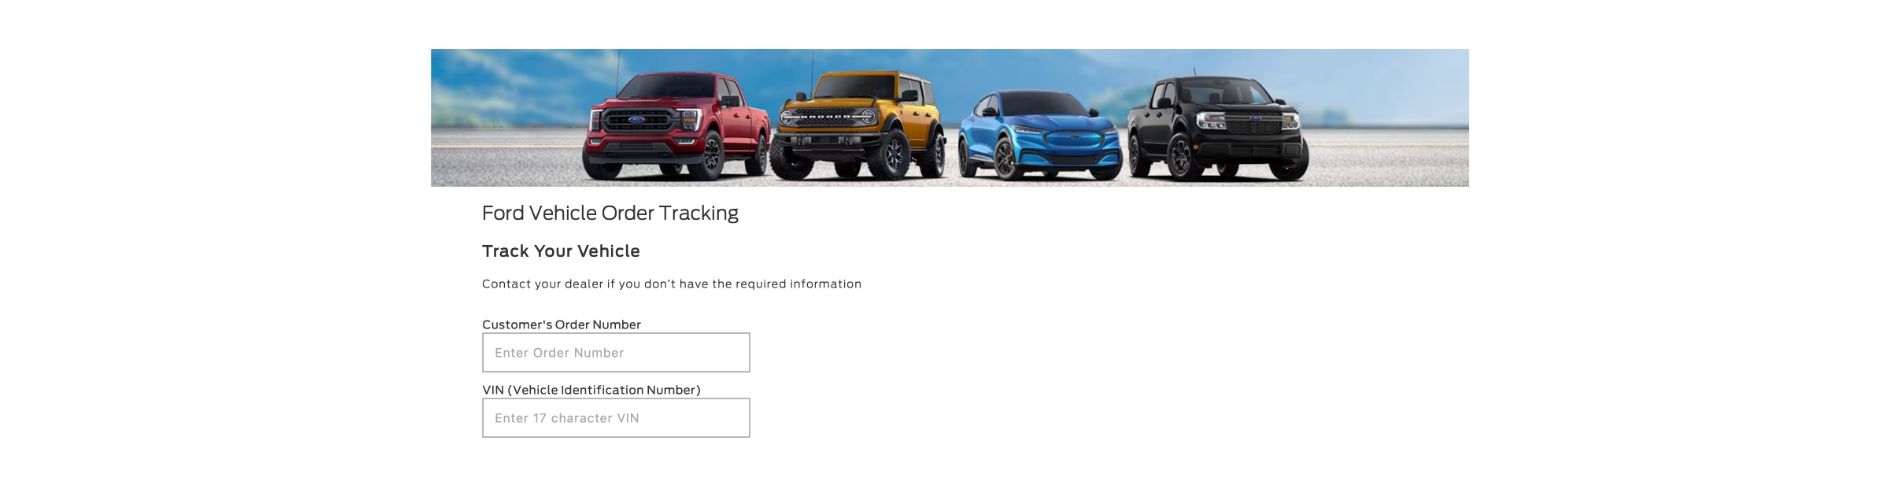 Ford Vehicle Order Tracking